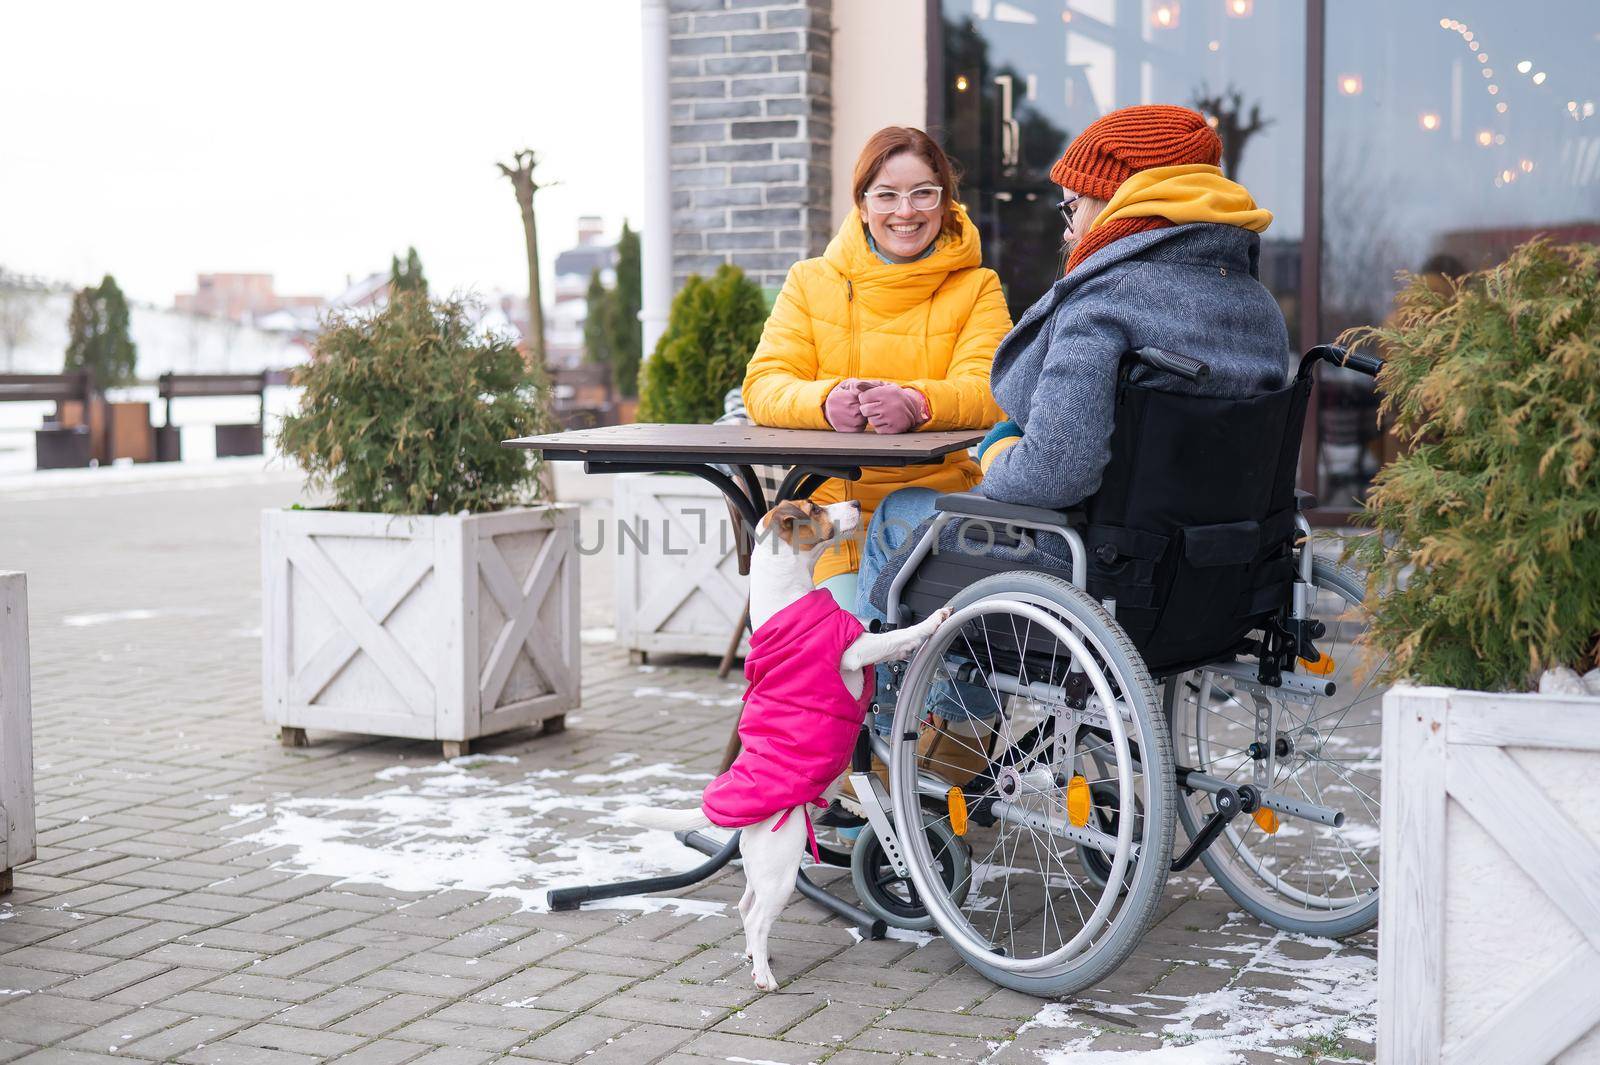 Two girlfriends in a cafe on a street terrace in winter. Woman in a wheelchair. by mrwed54